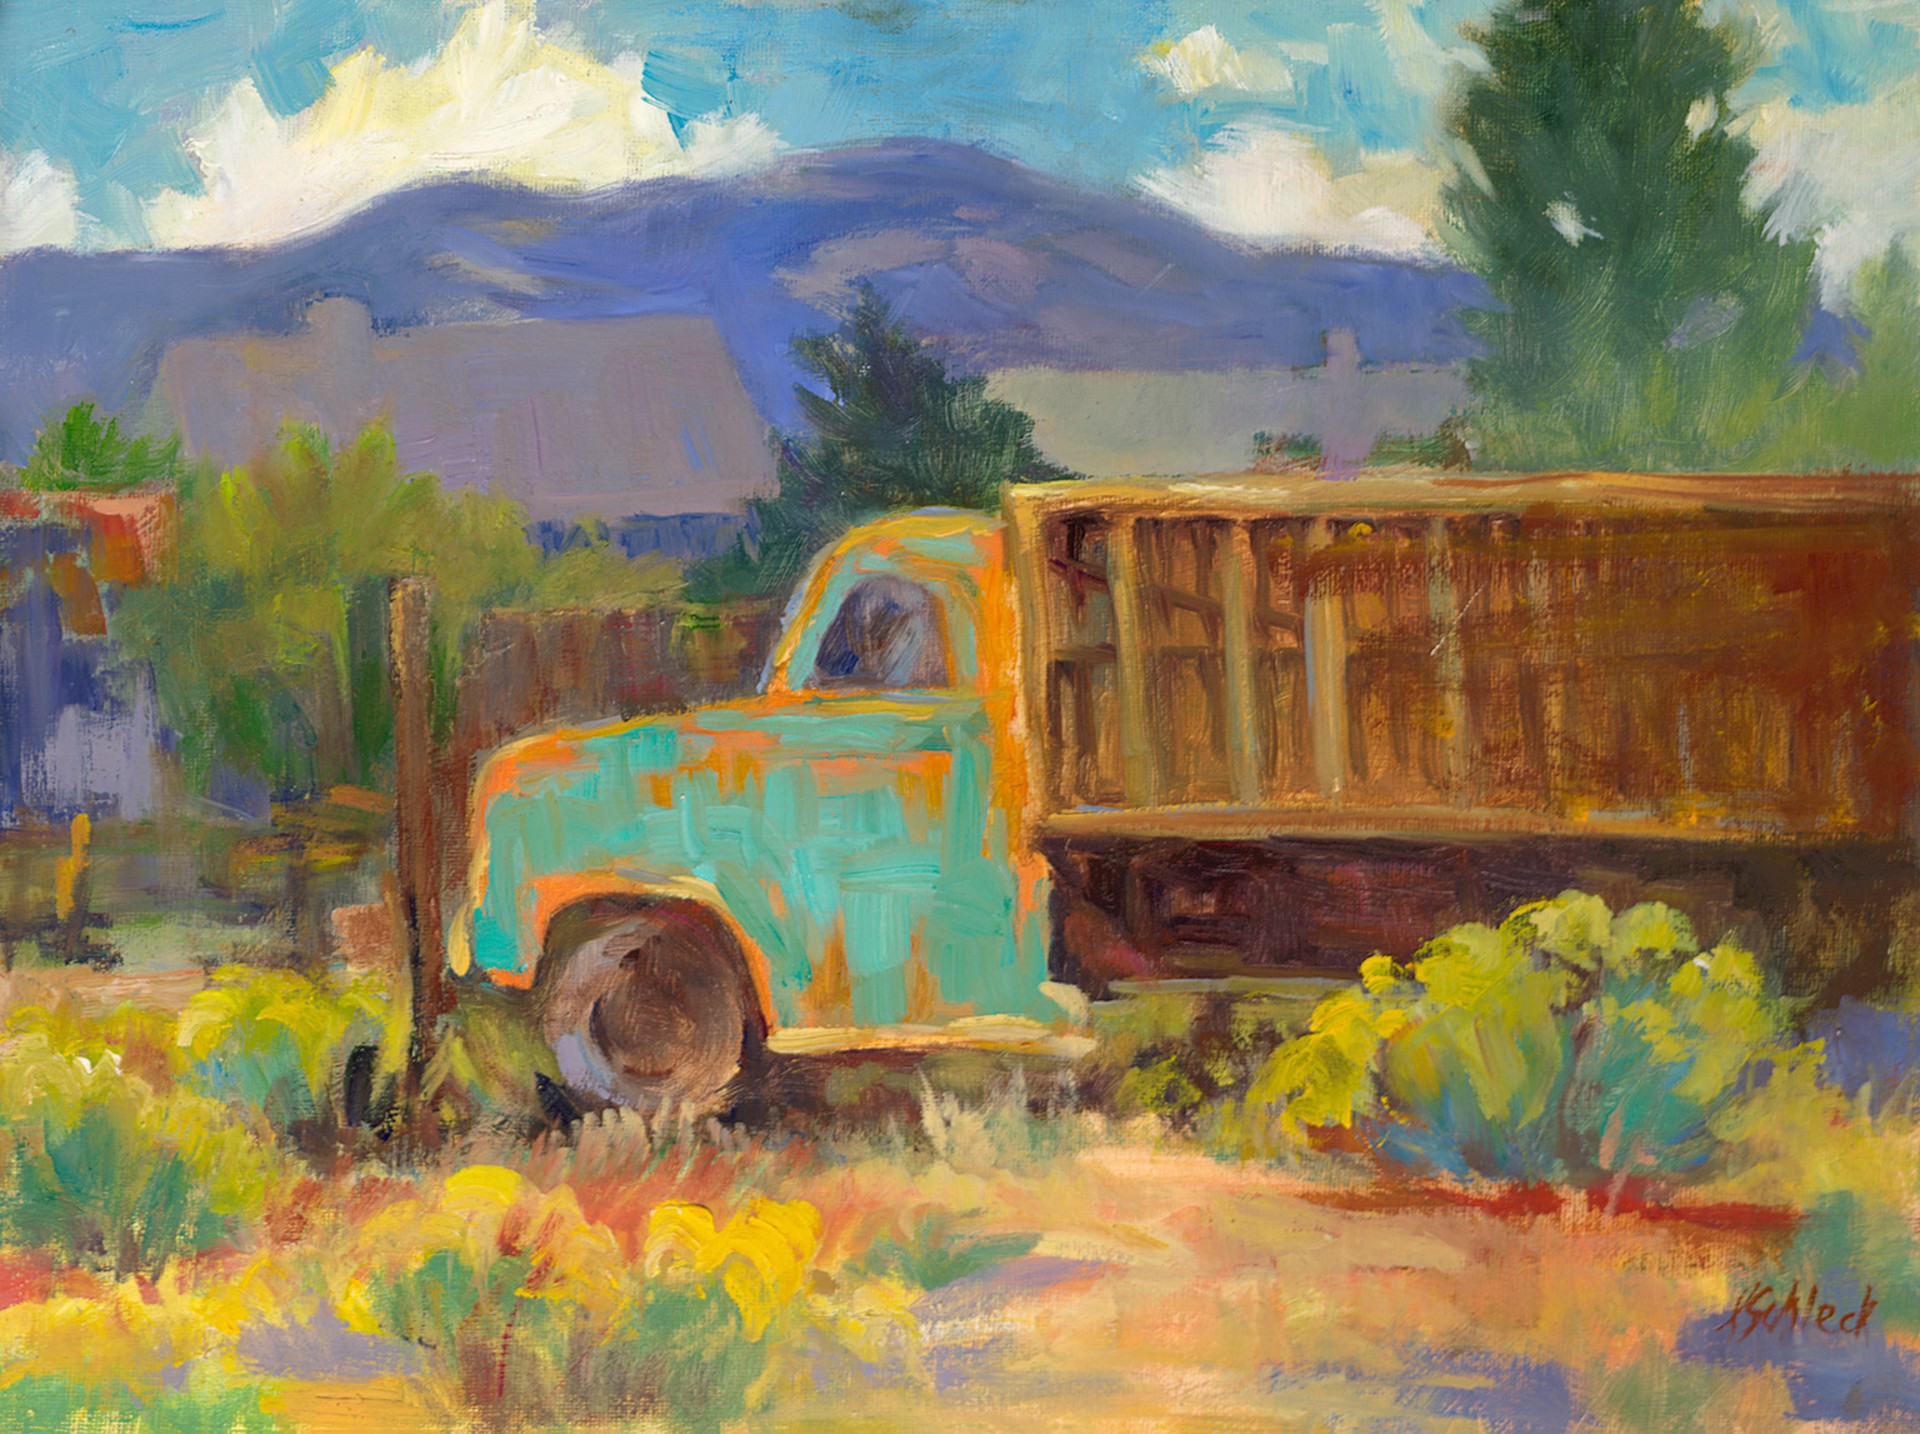 Day Off - Taos Truck by Suzanne Schleck